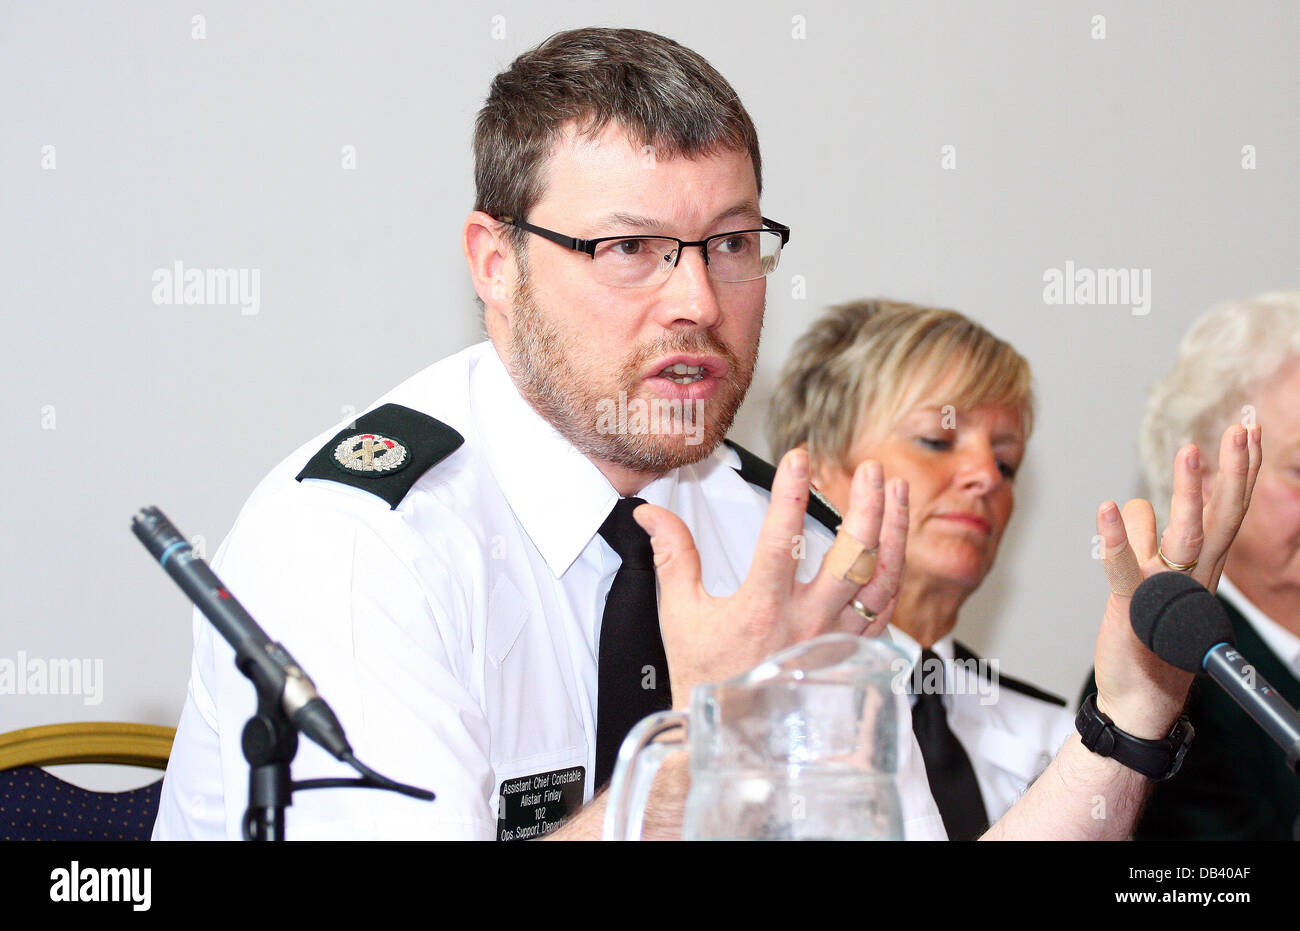 Belfast, Northern Ireland, UK. 23rd July 2013. World Police and Fire Games press conference in the Ulster Hall Belfast - Assistant Chief Constable Alistair Finlay Credit:  Kevin Scott/Alamy Live News Stock Photo